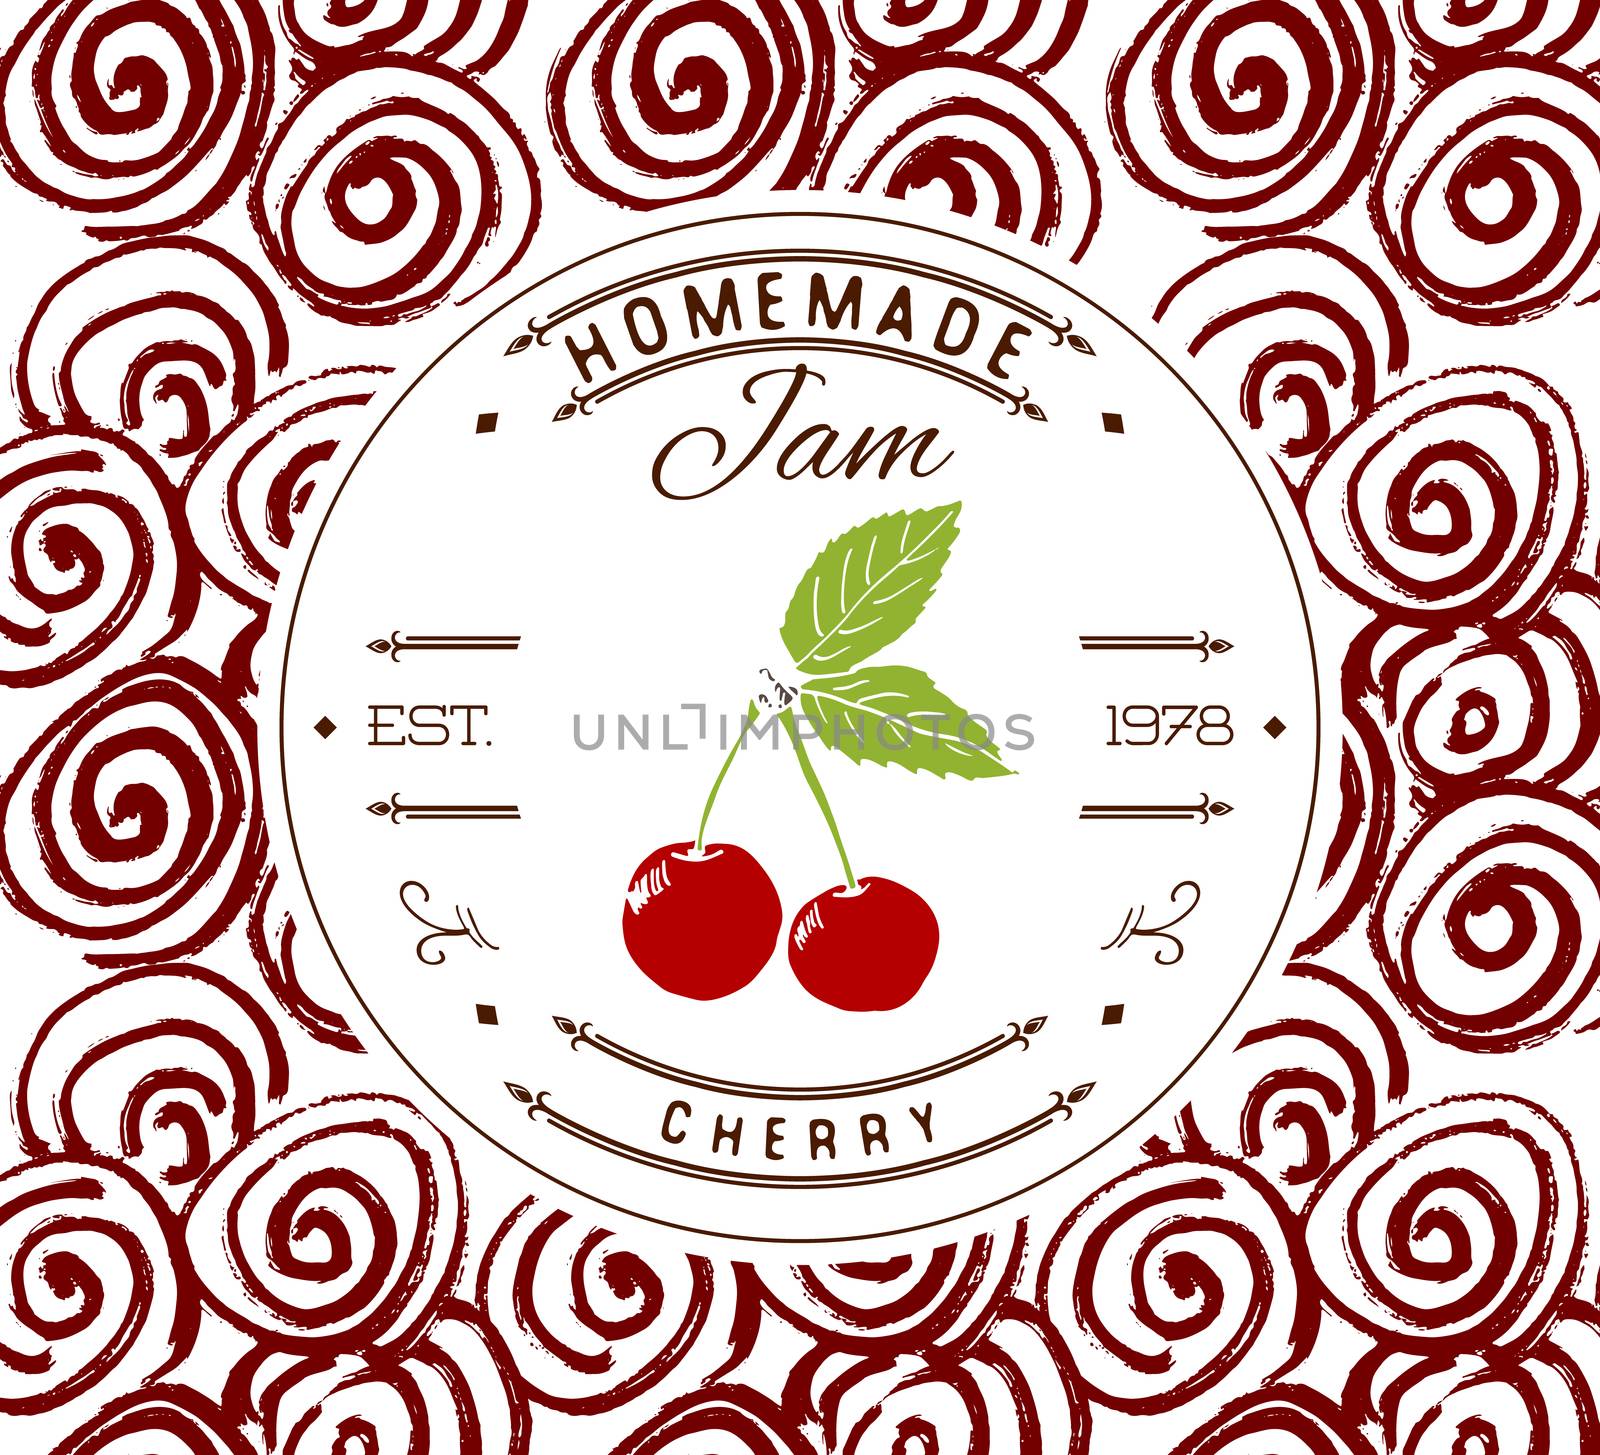 Jam label design template. for cherry dessert product with hand drawn sketched fruit and background. Doodle vector cherry illustration brand identity.